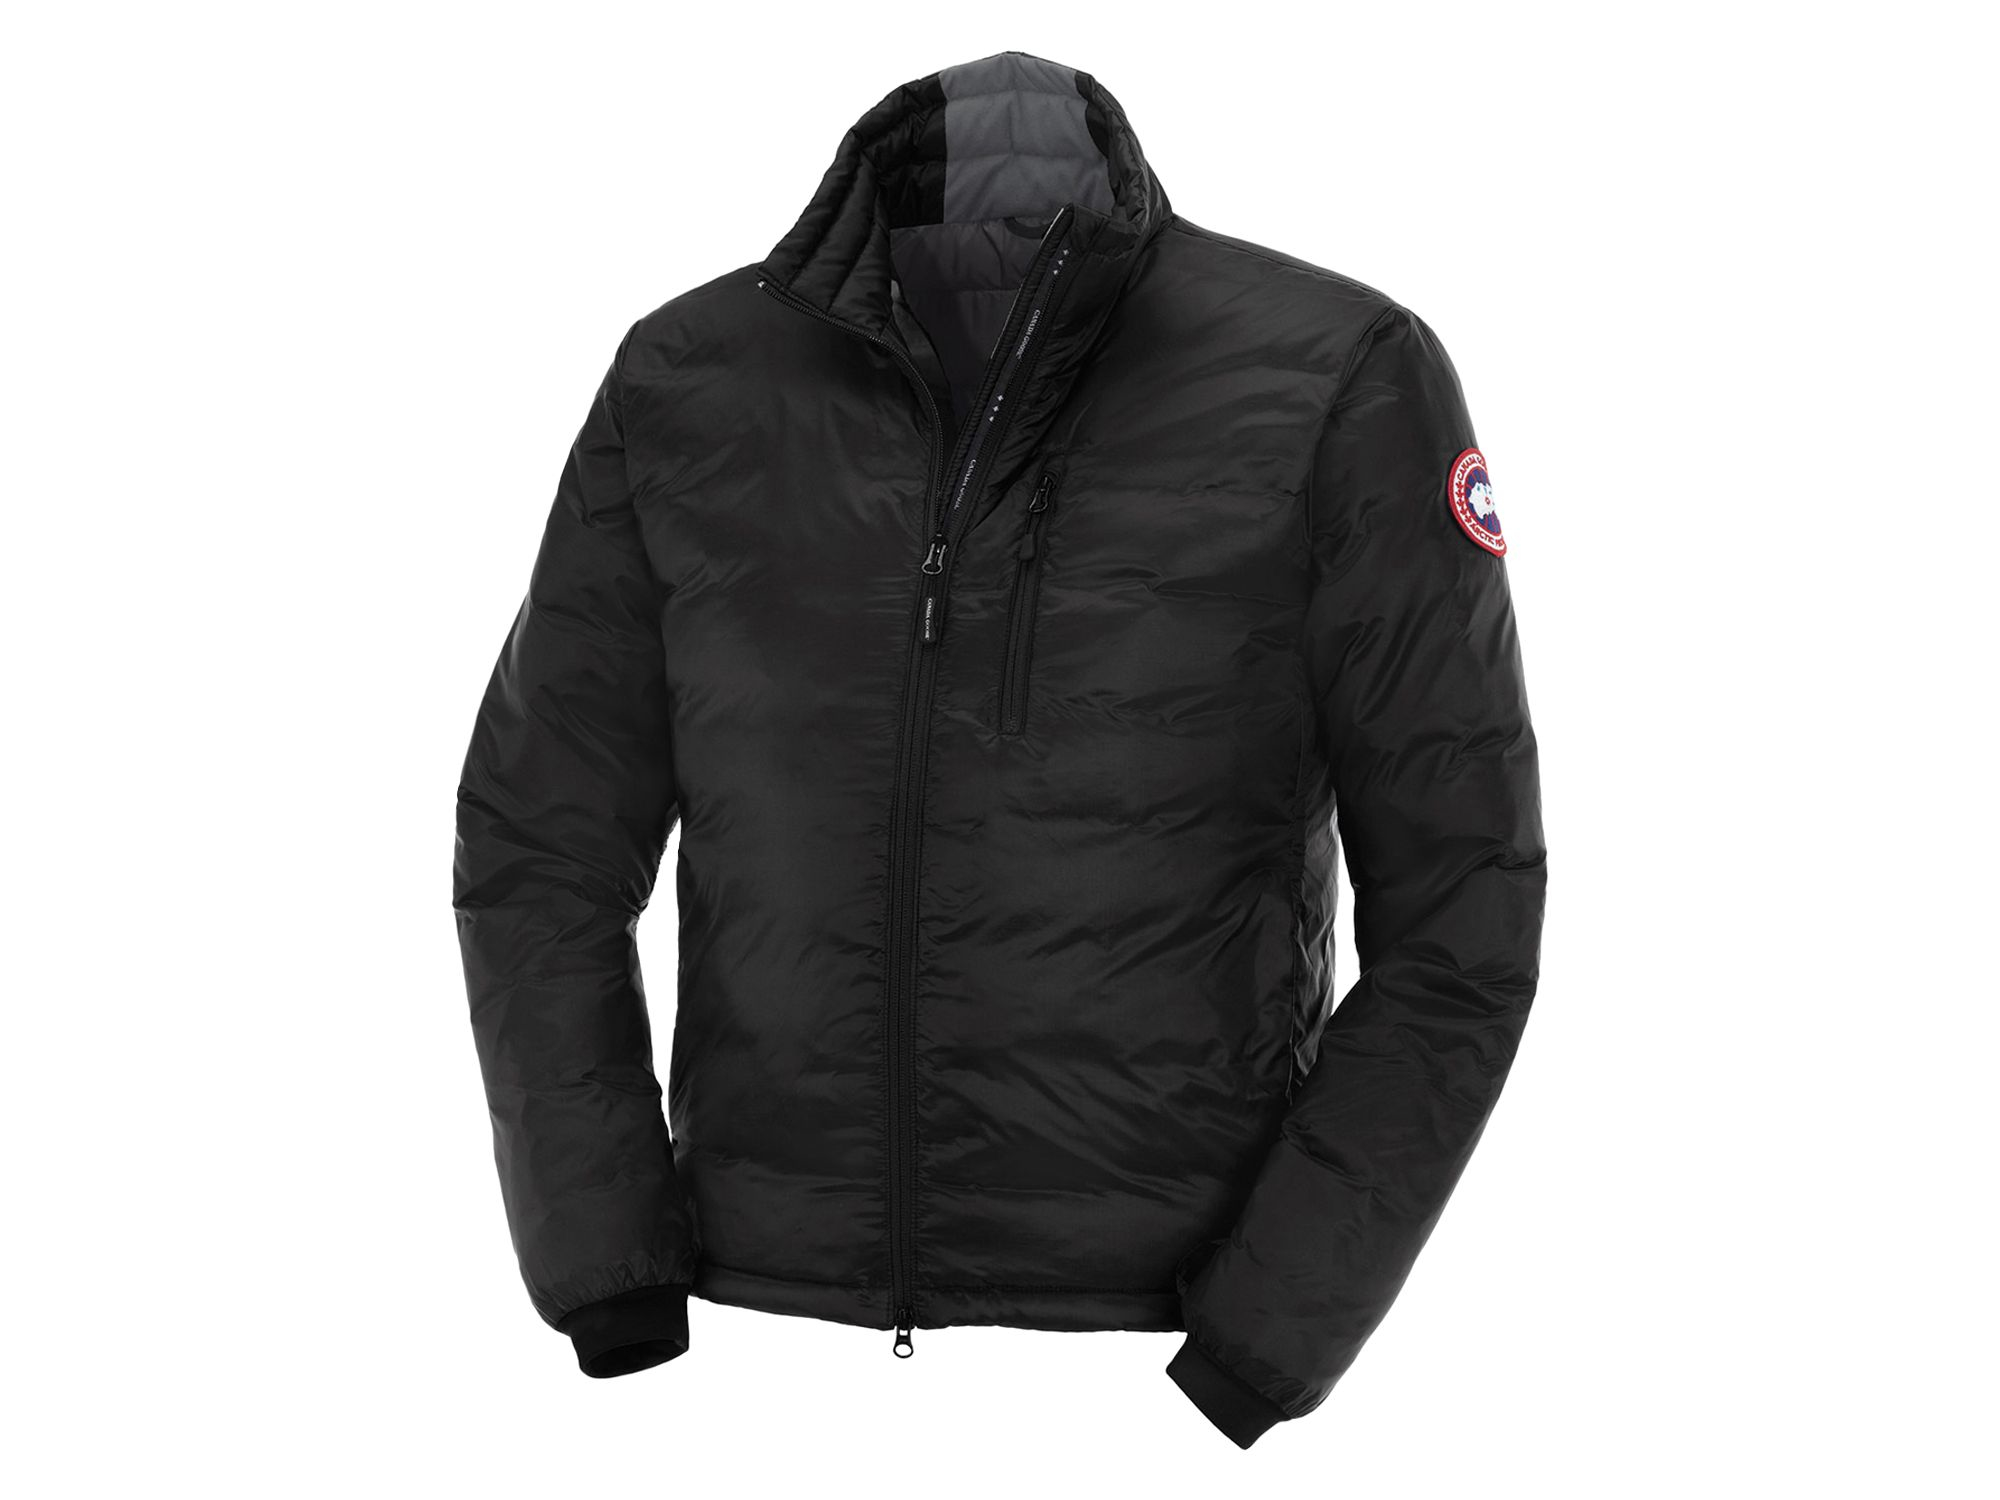 Lyst - Canada Goose Lodge Down Jacket in Black for Men